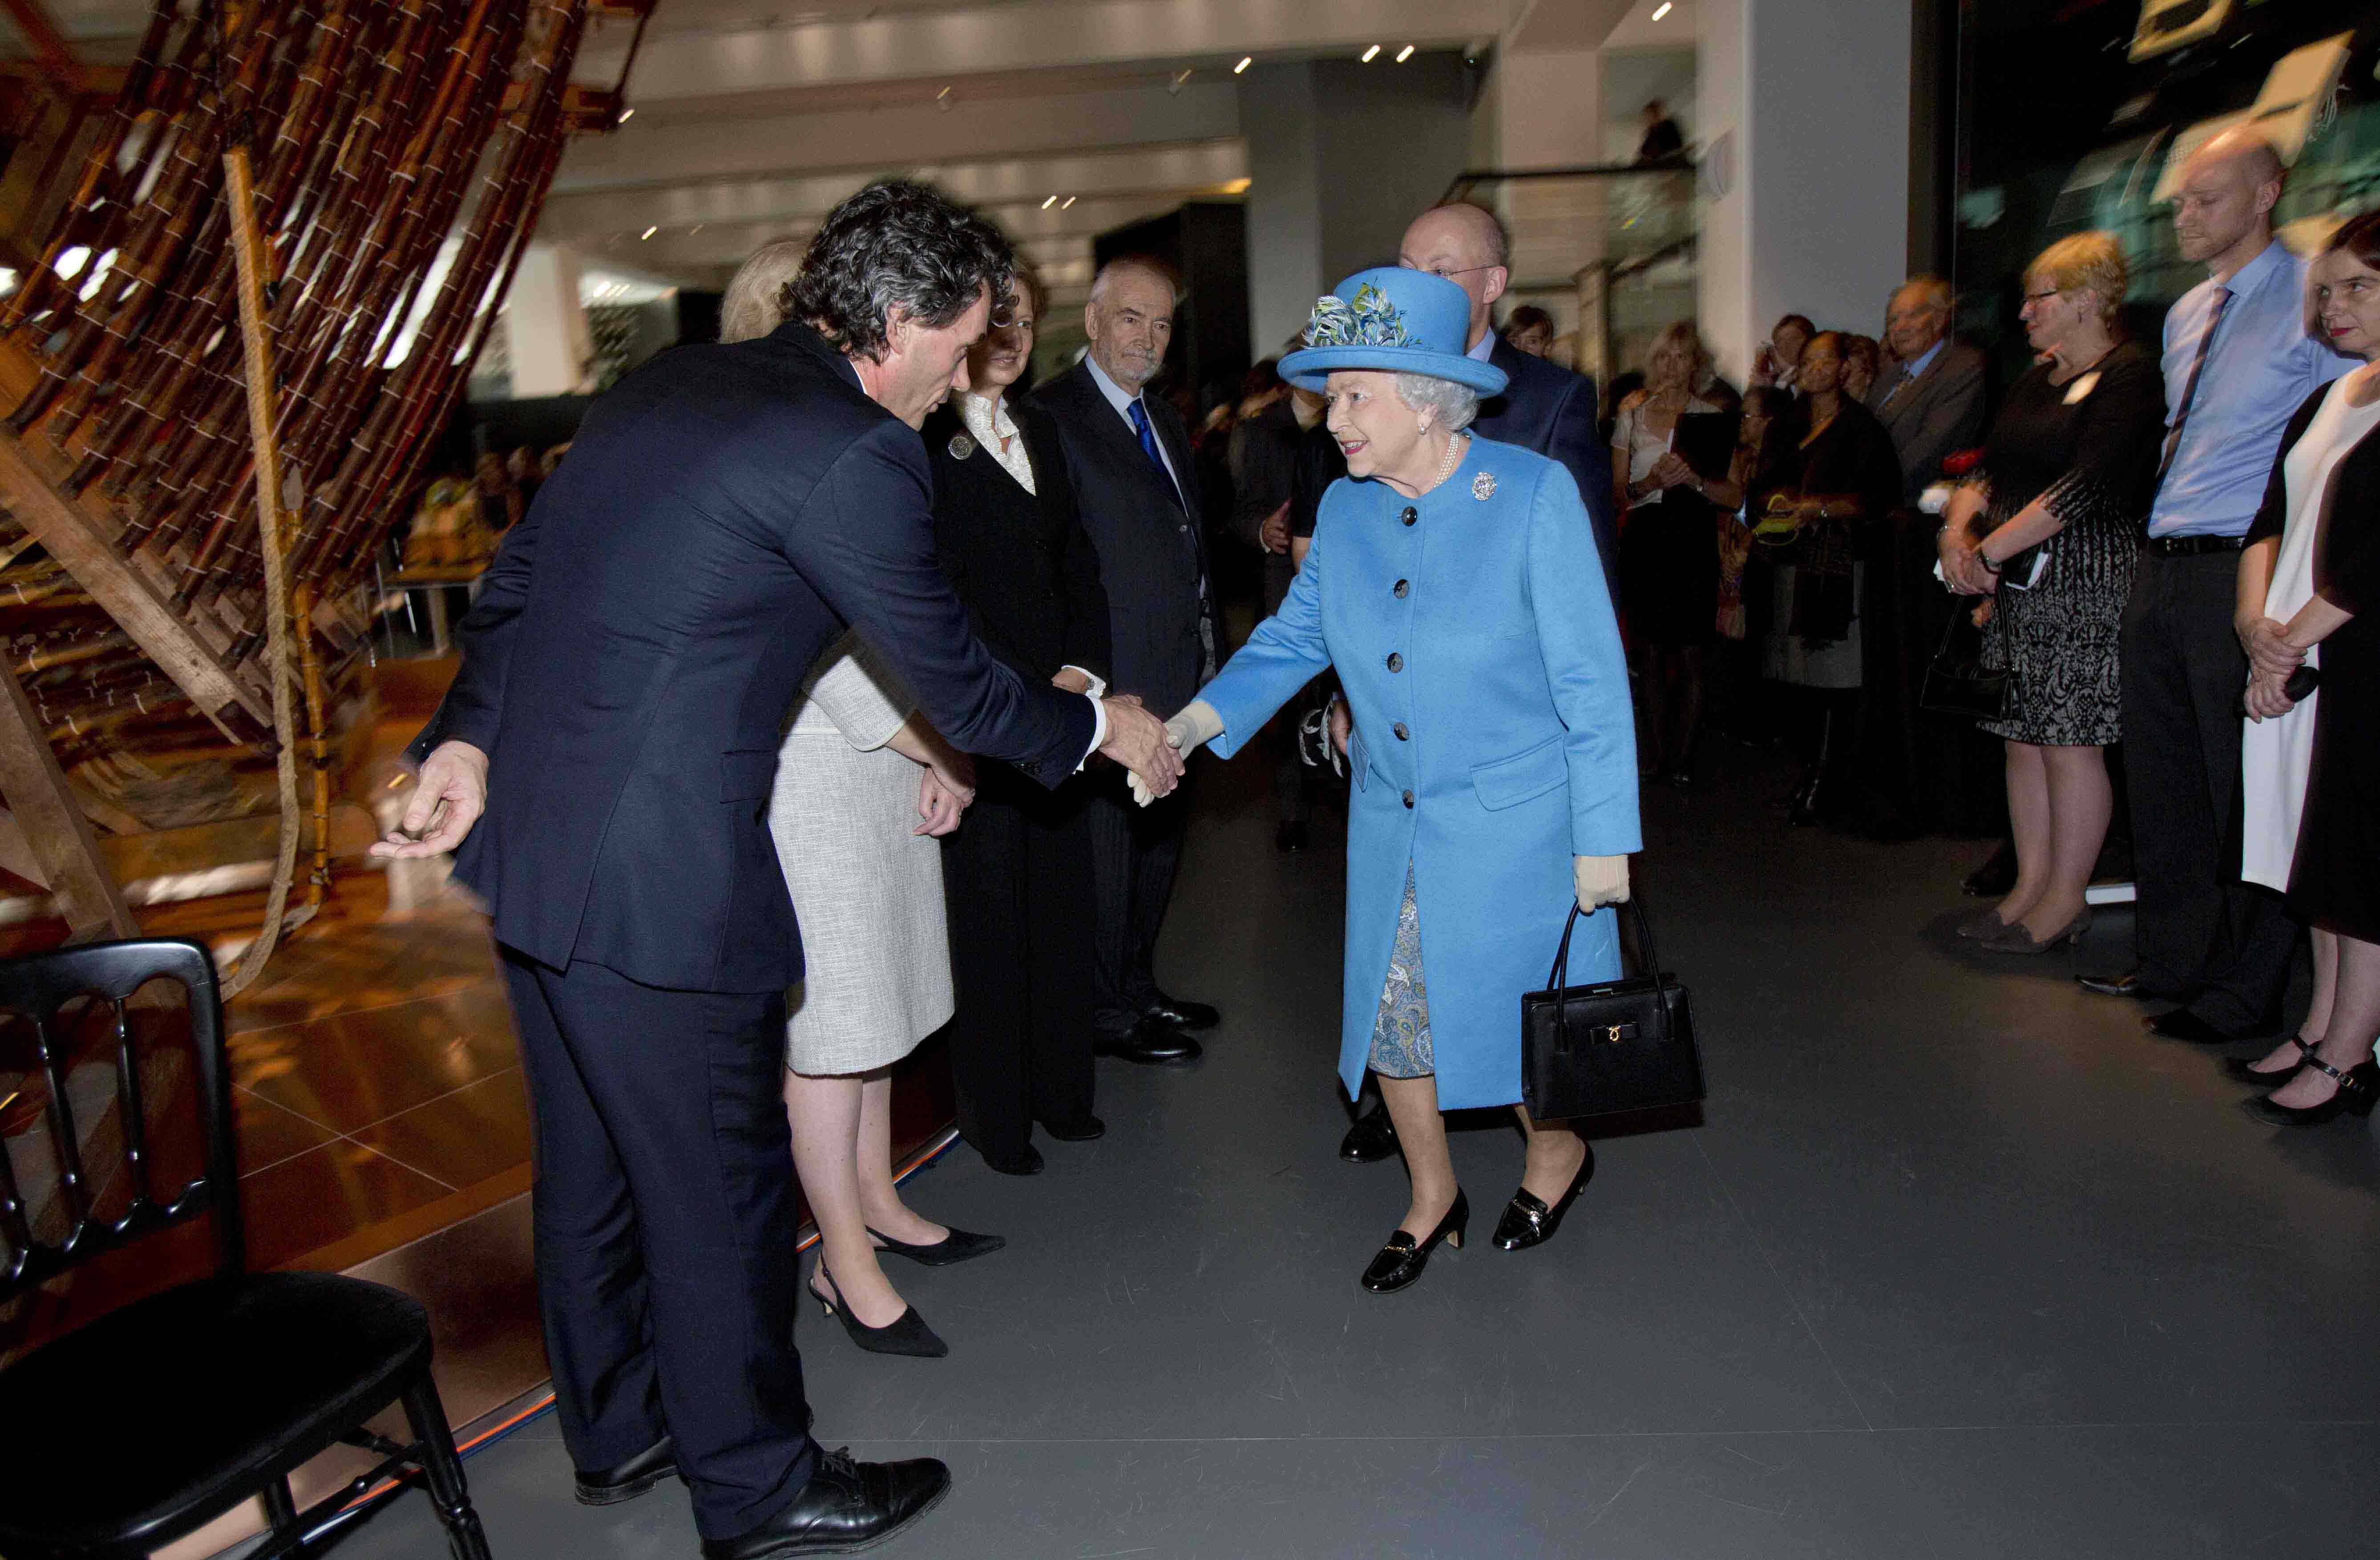 The Queen meets Gavin Patterson, CEO of BT Group at the opening of the Information Age gallery. 